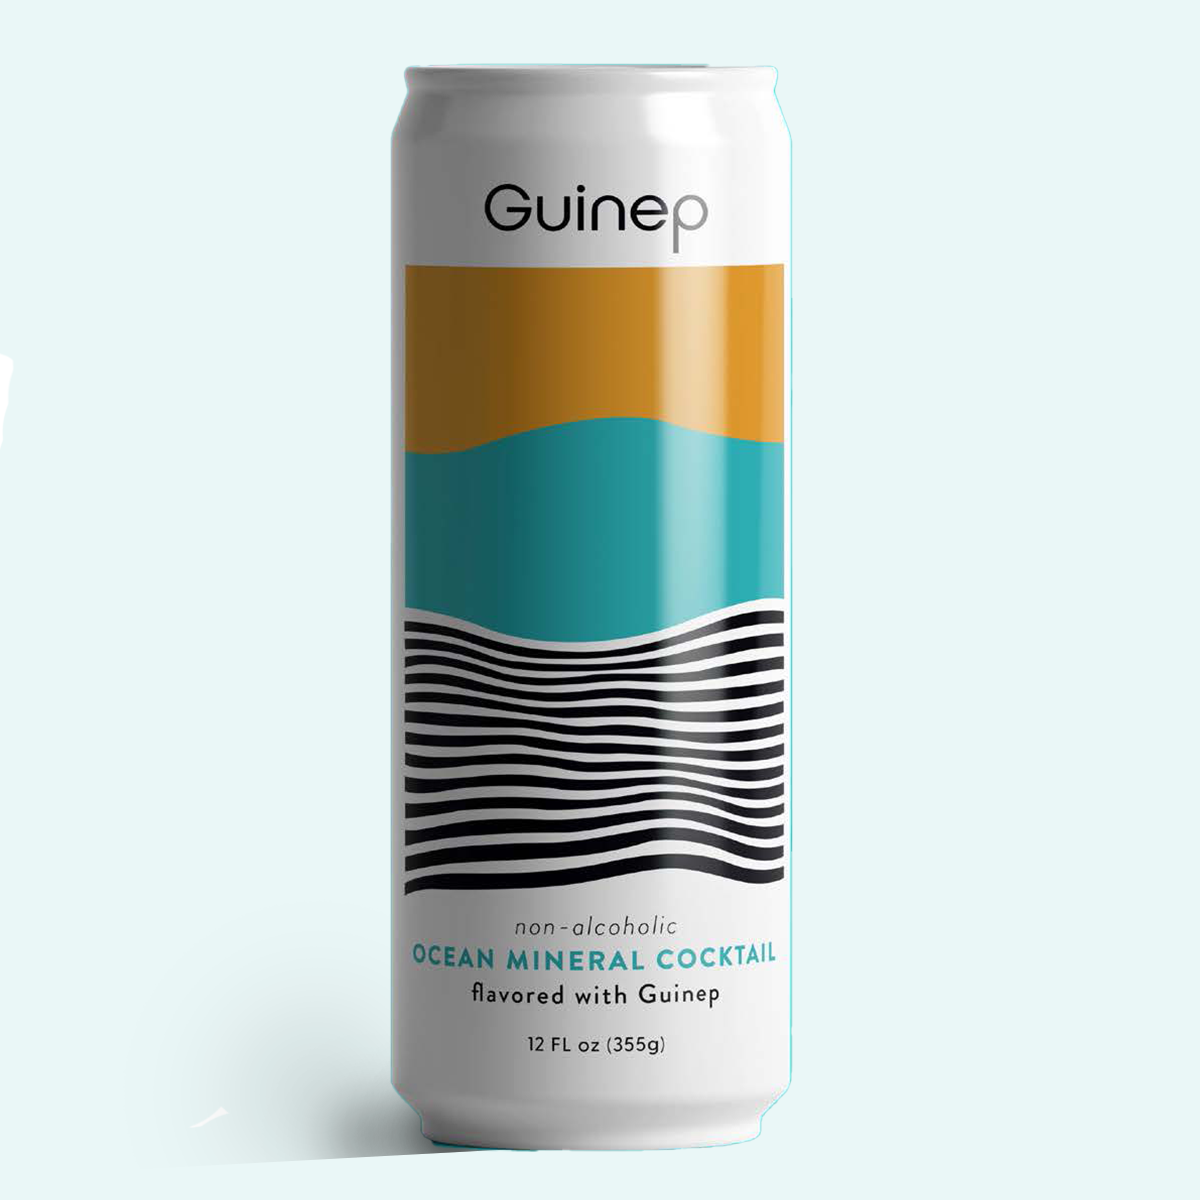 Guinep - Ocean Mineral Cocktail